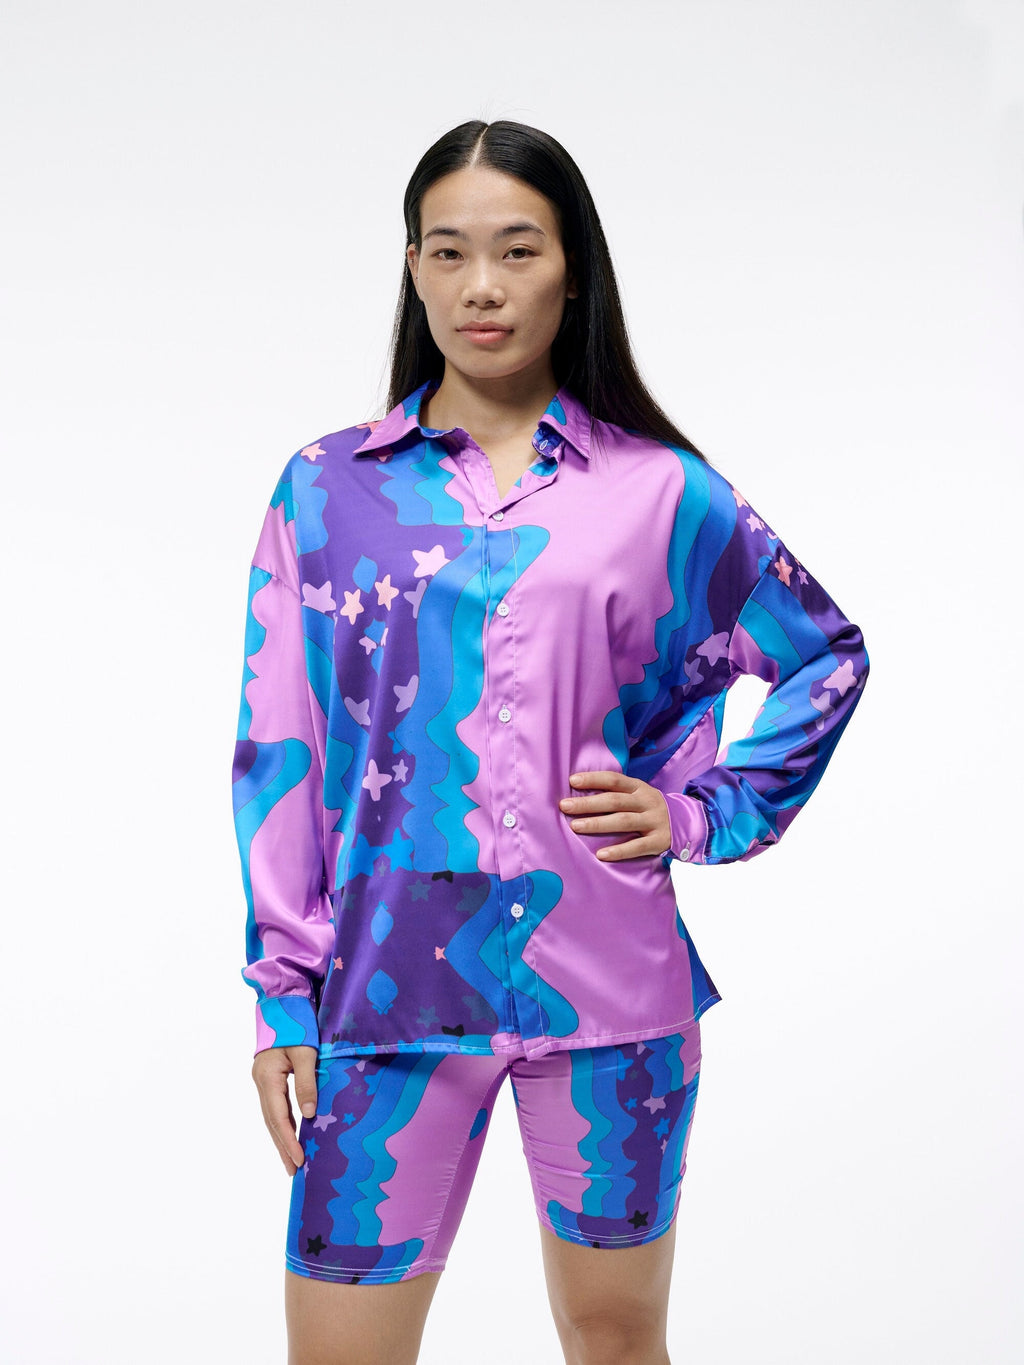 The Galaxy Glow Aura Shirt | A Groovy Satin Shirt for Dreamers | Long Sleeve Collared Buttondown in Magenta and Blues | Goose Taffy